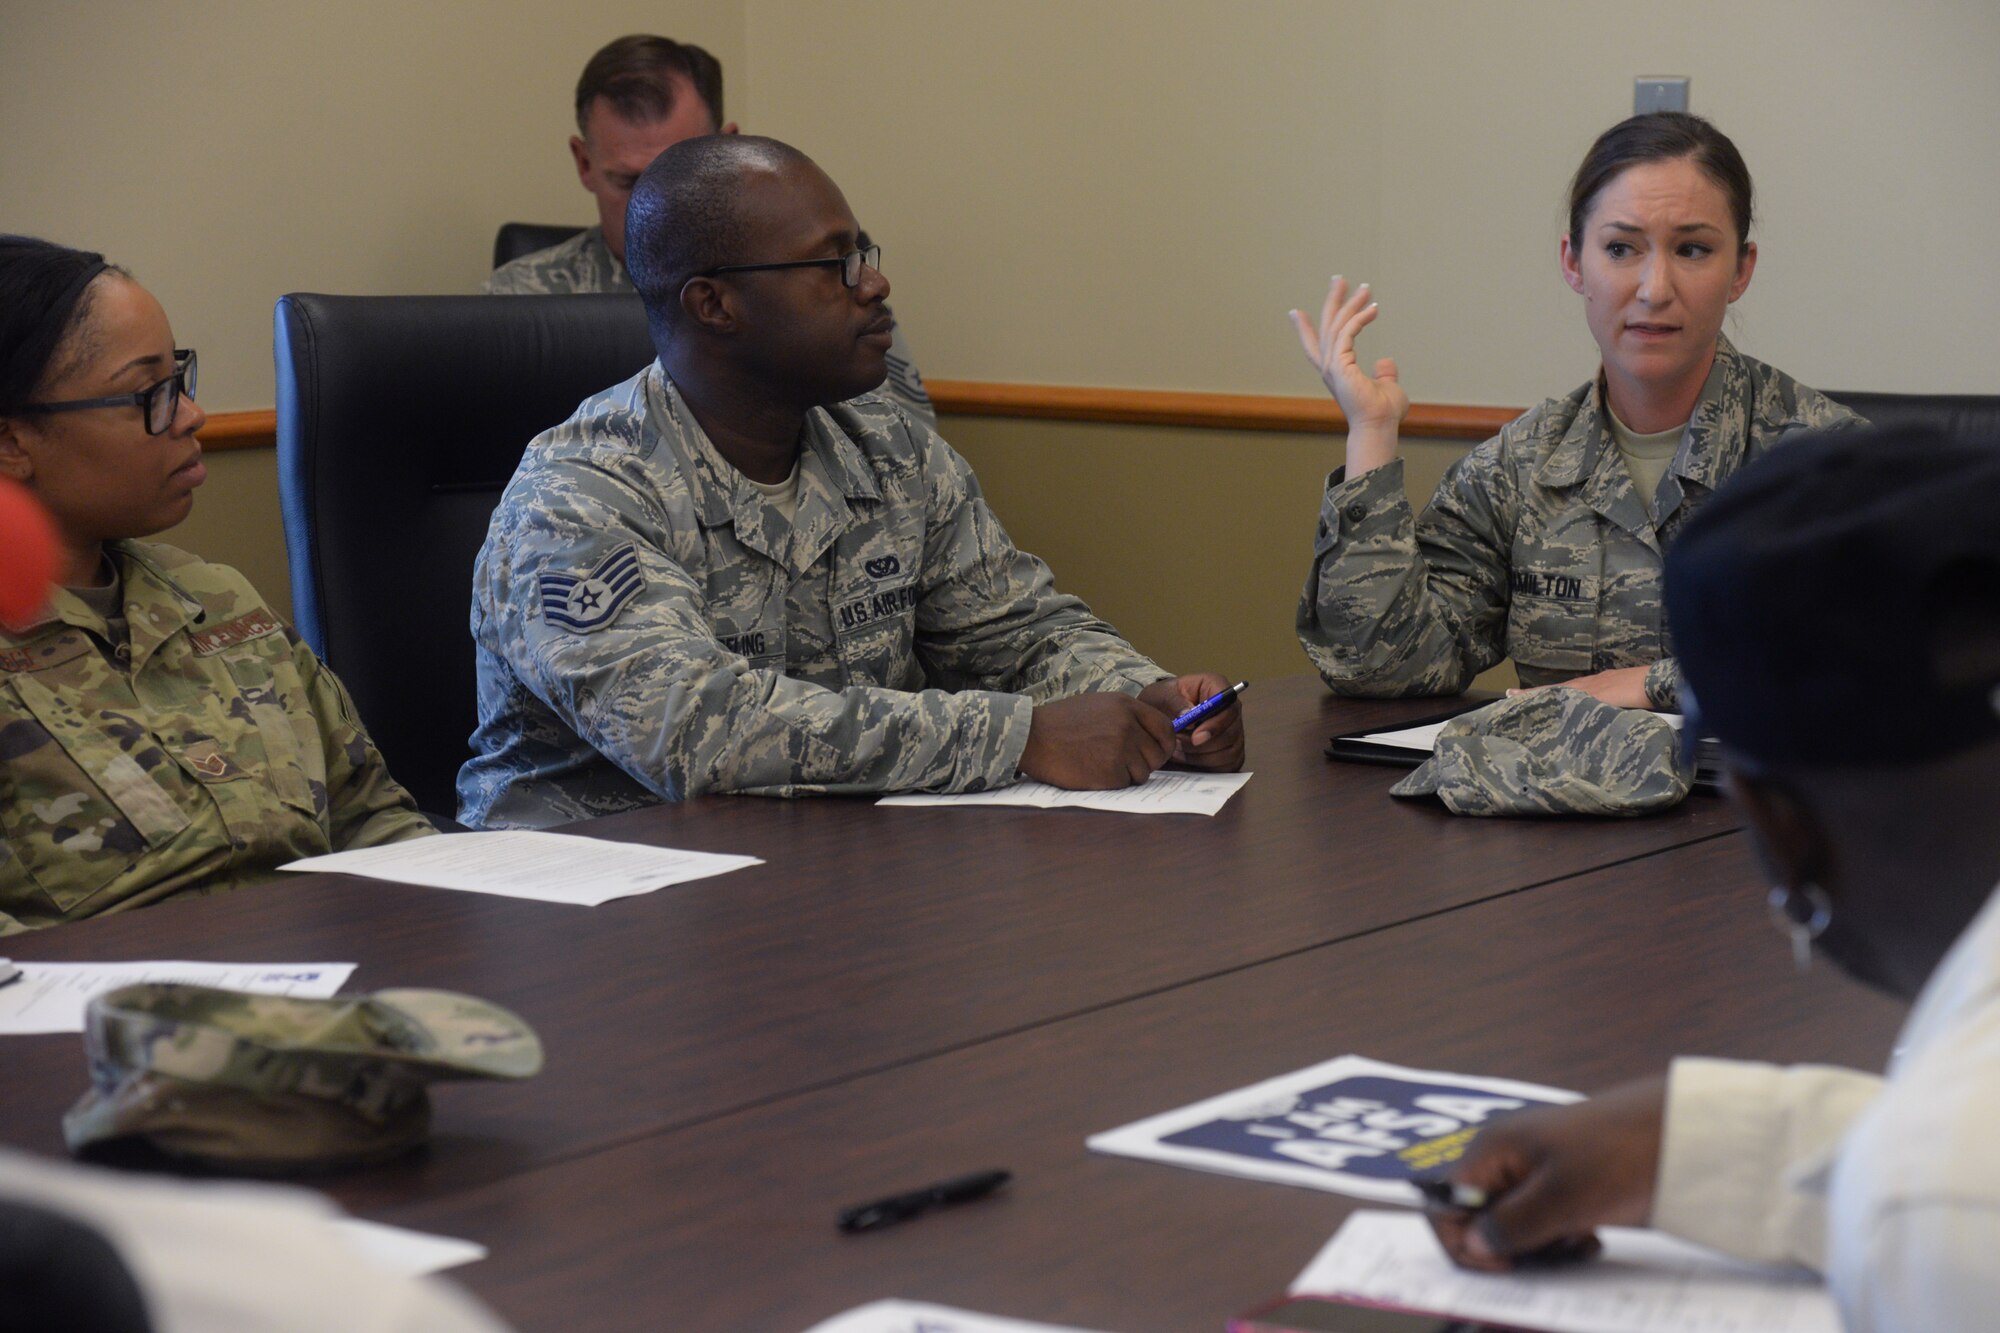 Tech Sgt. Kelly Hamilton, Air Force Sergeants Association vice-president, speaks to members during a meeting July 10, 2019, at Malmstrom Air Force Base, Mont.